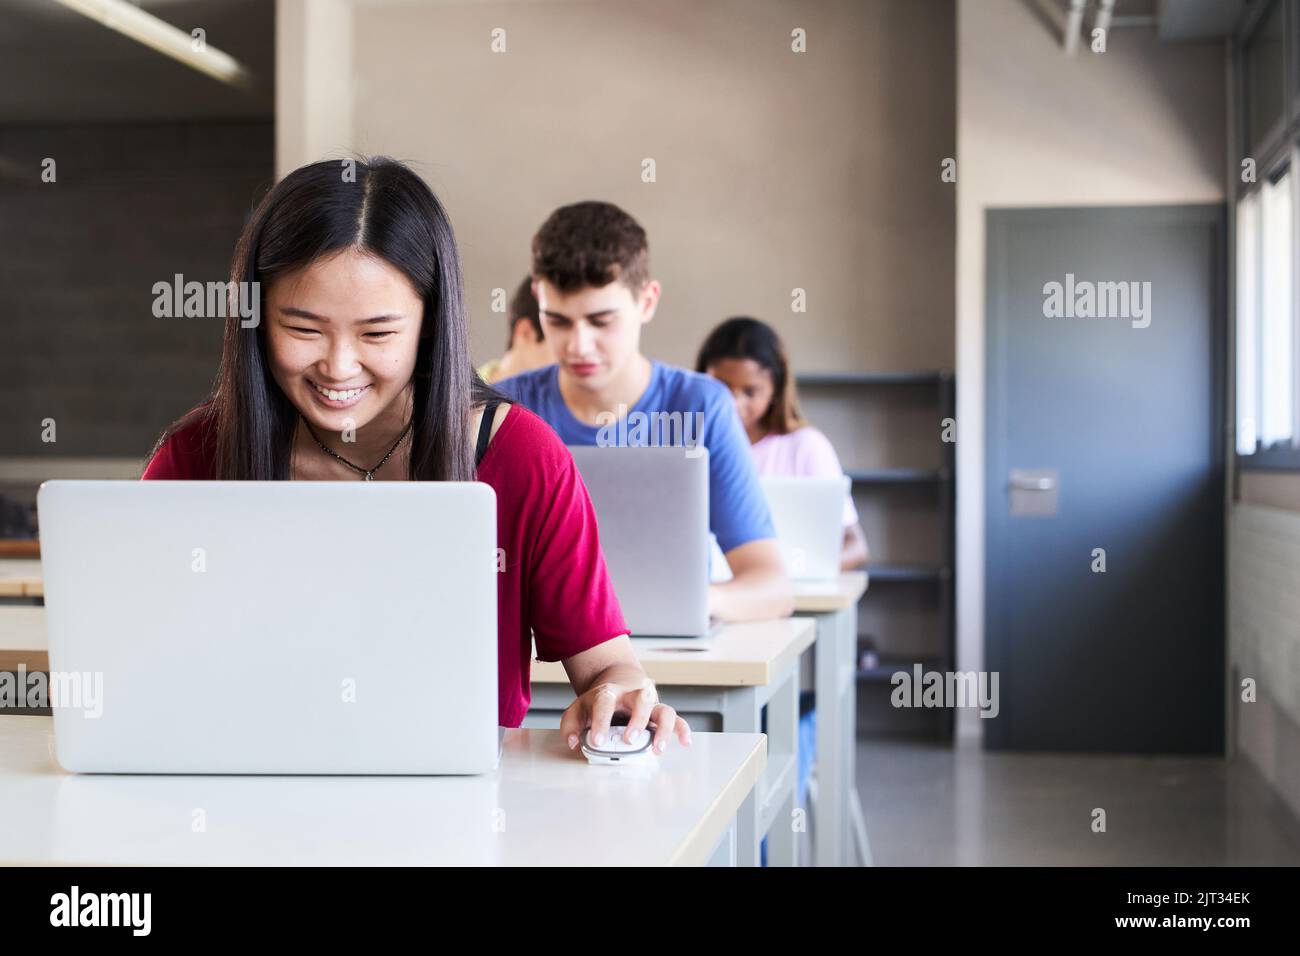 Multiracial group of high school students in the classroom using laptop computers. A smiling Asian girl studies through digital media in new Stock Photo